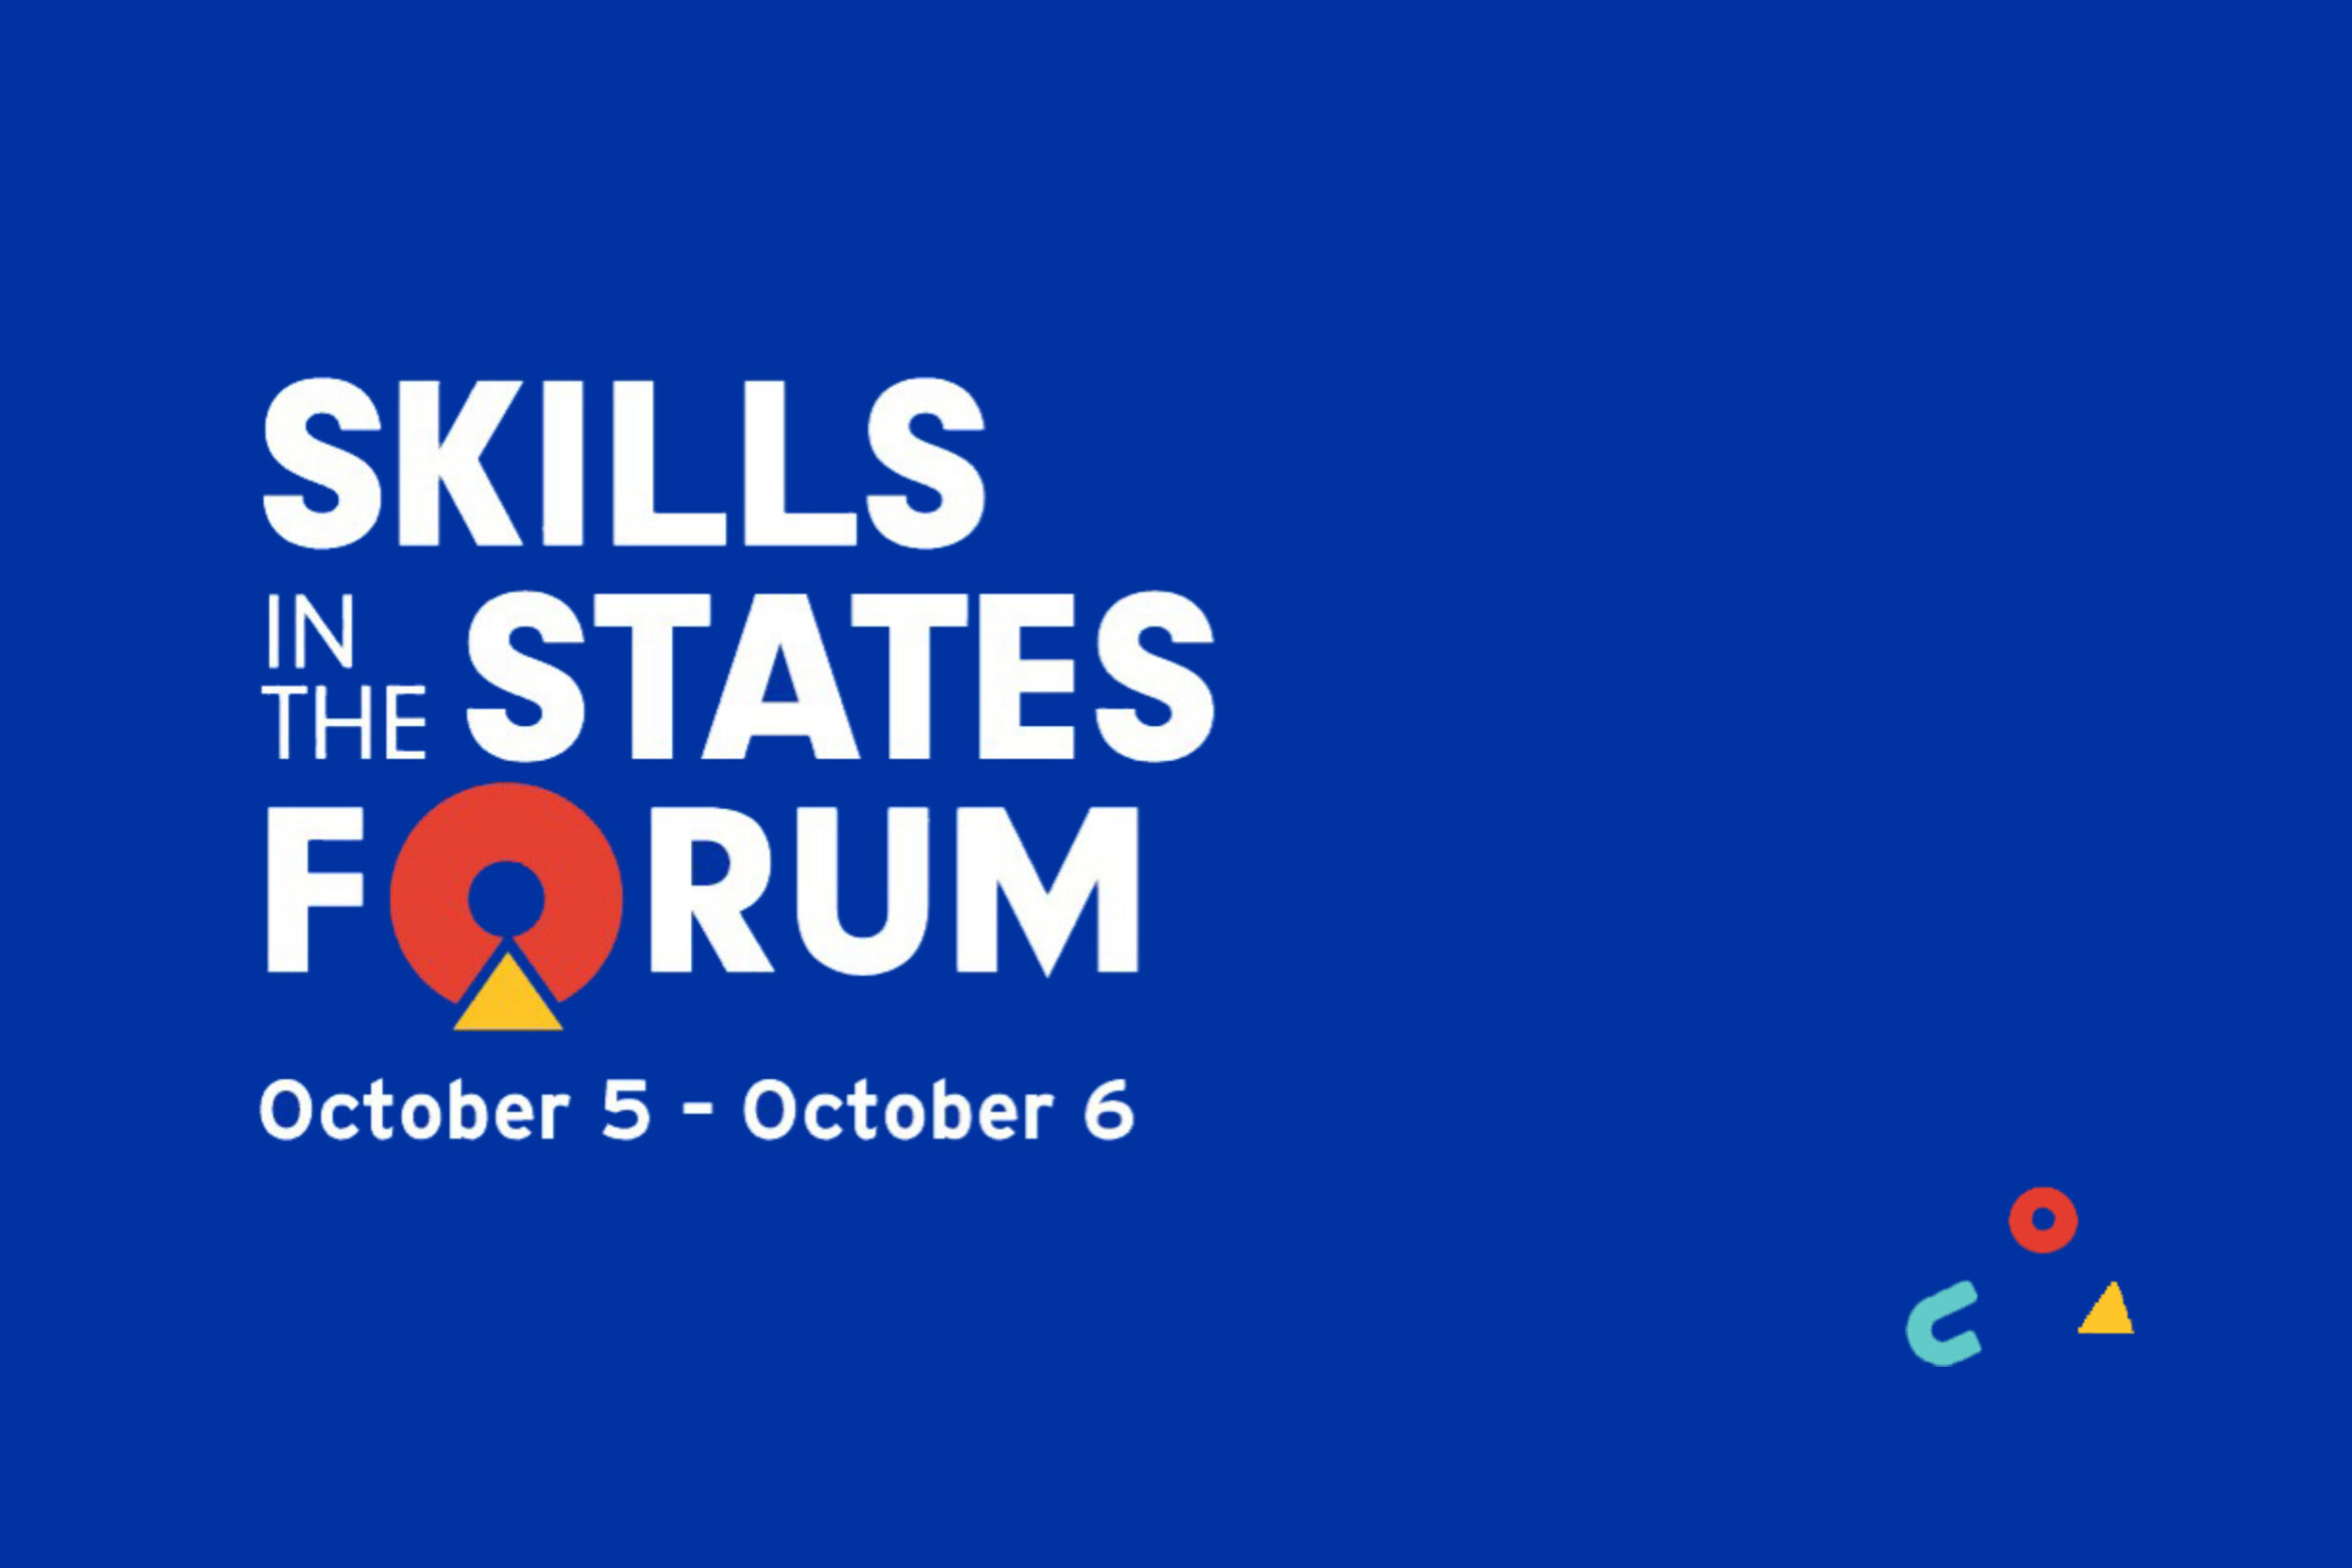 State advocates gain inspiration and policy ideas at NSC’s Skills in the States Forum